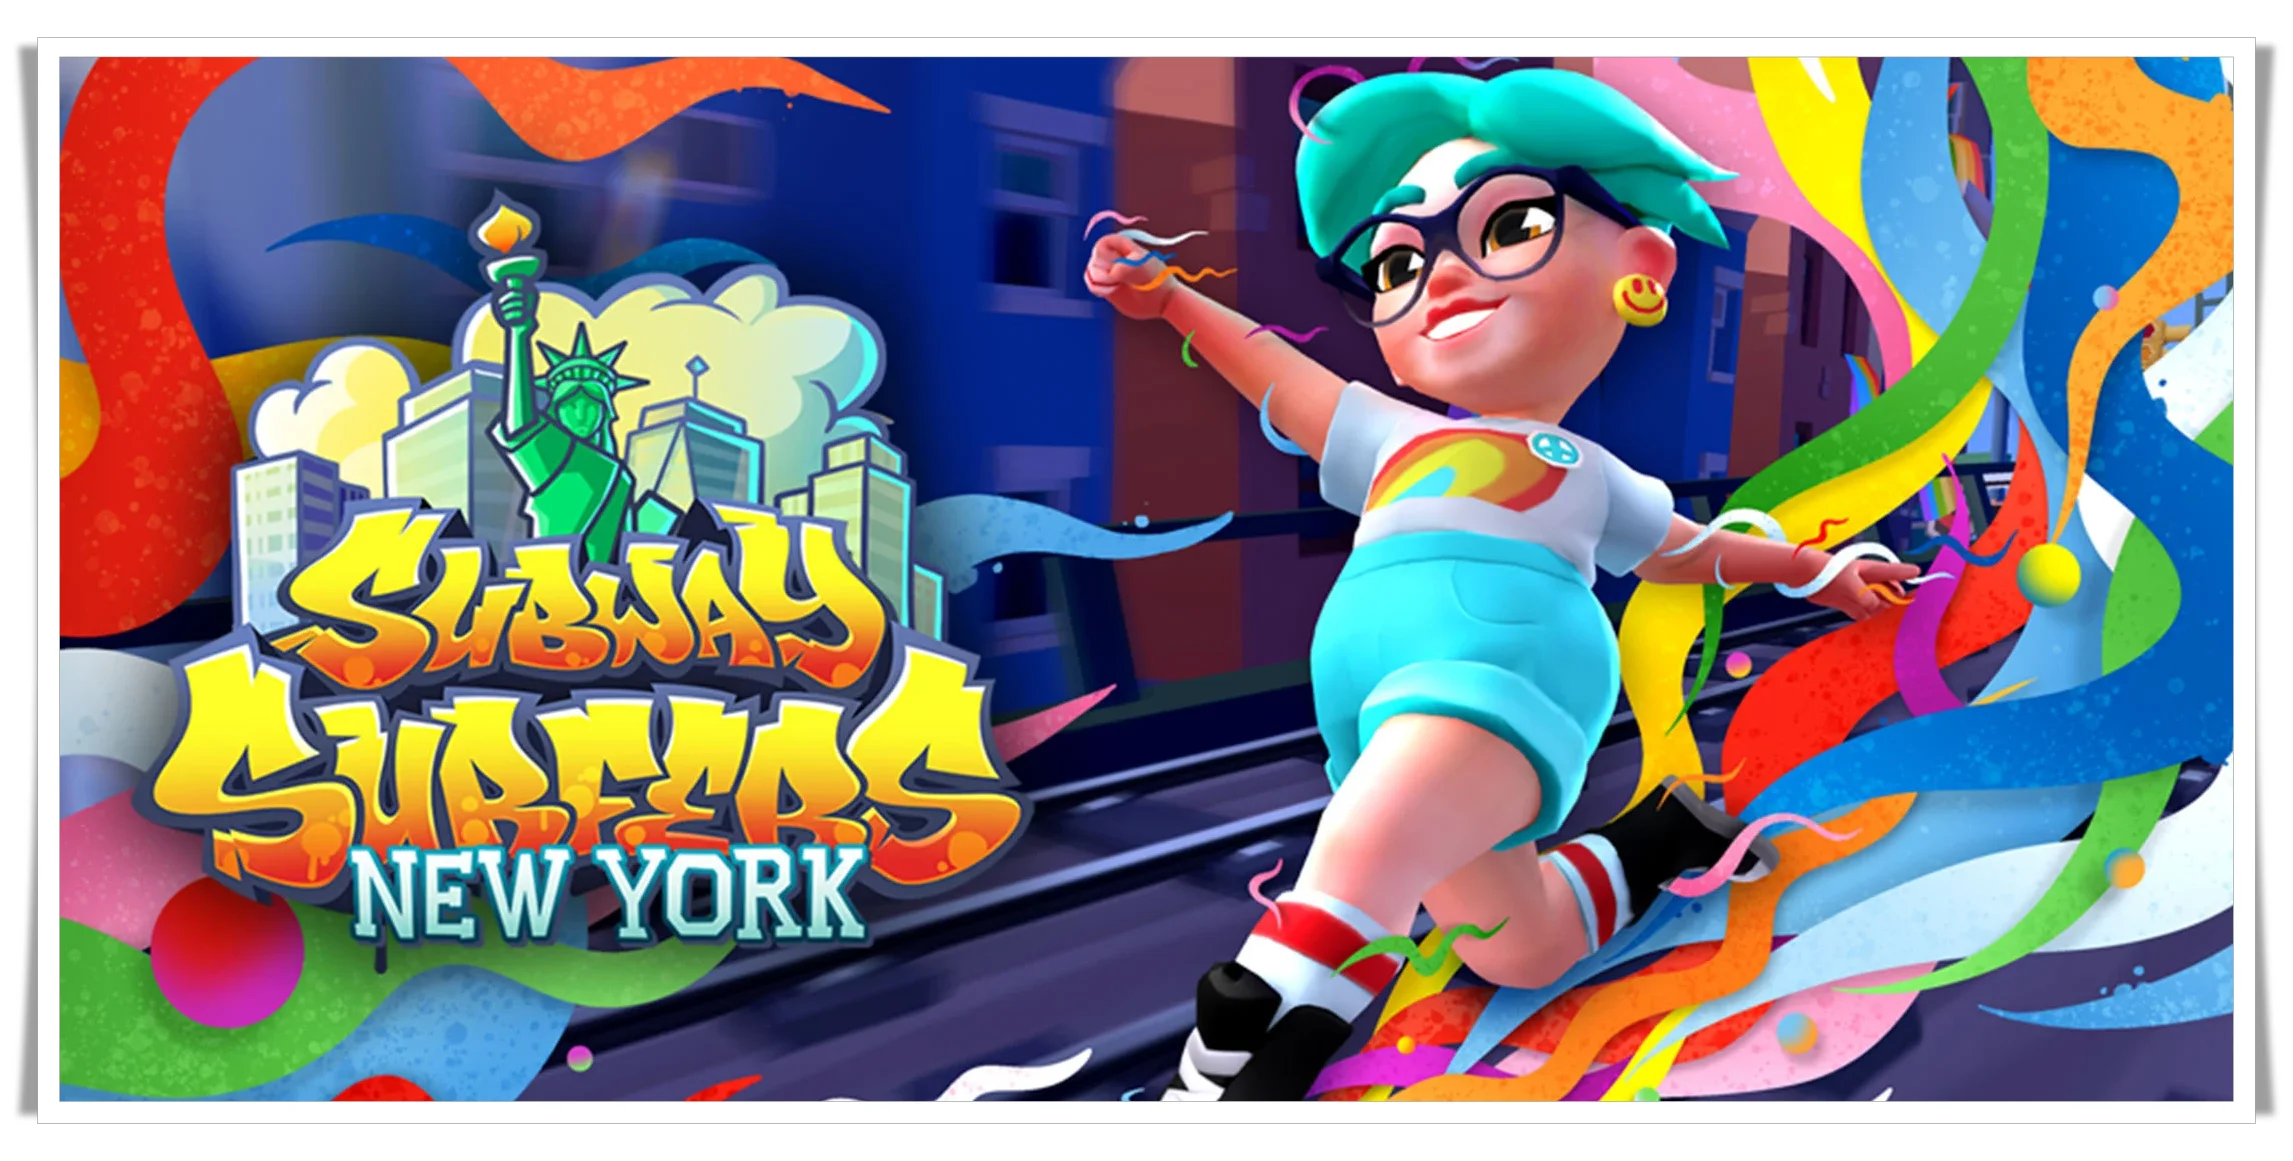 Subway Surfers 3.22 - Download for PC Free